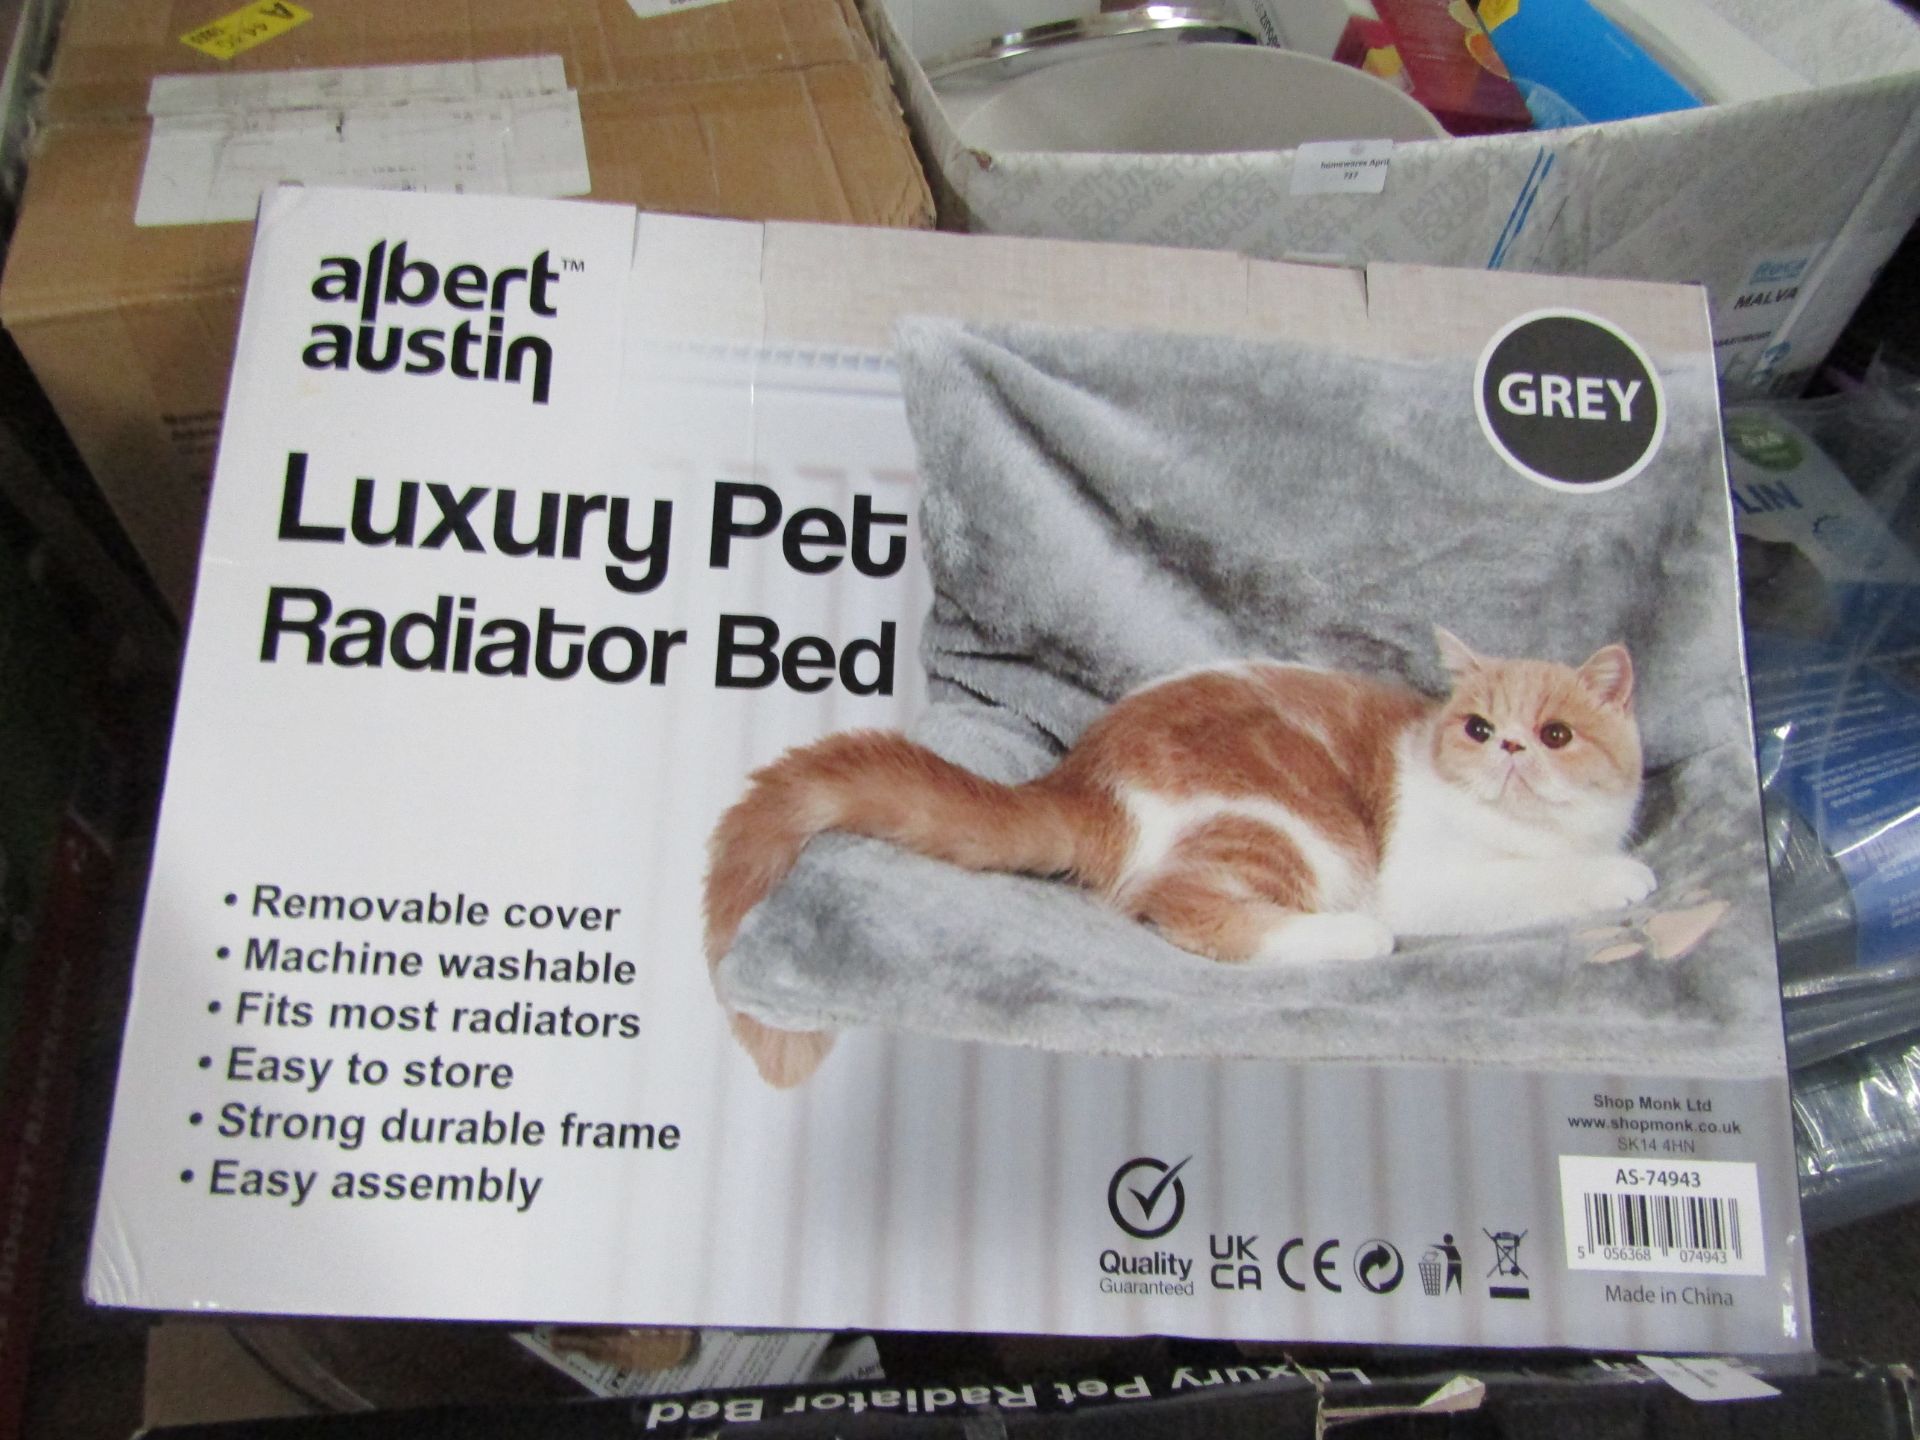 Luxury pet radiator bed, unchecked and boxed